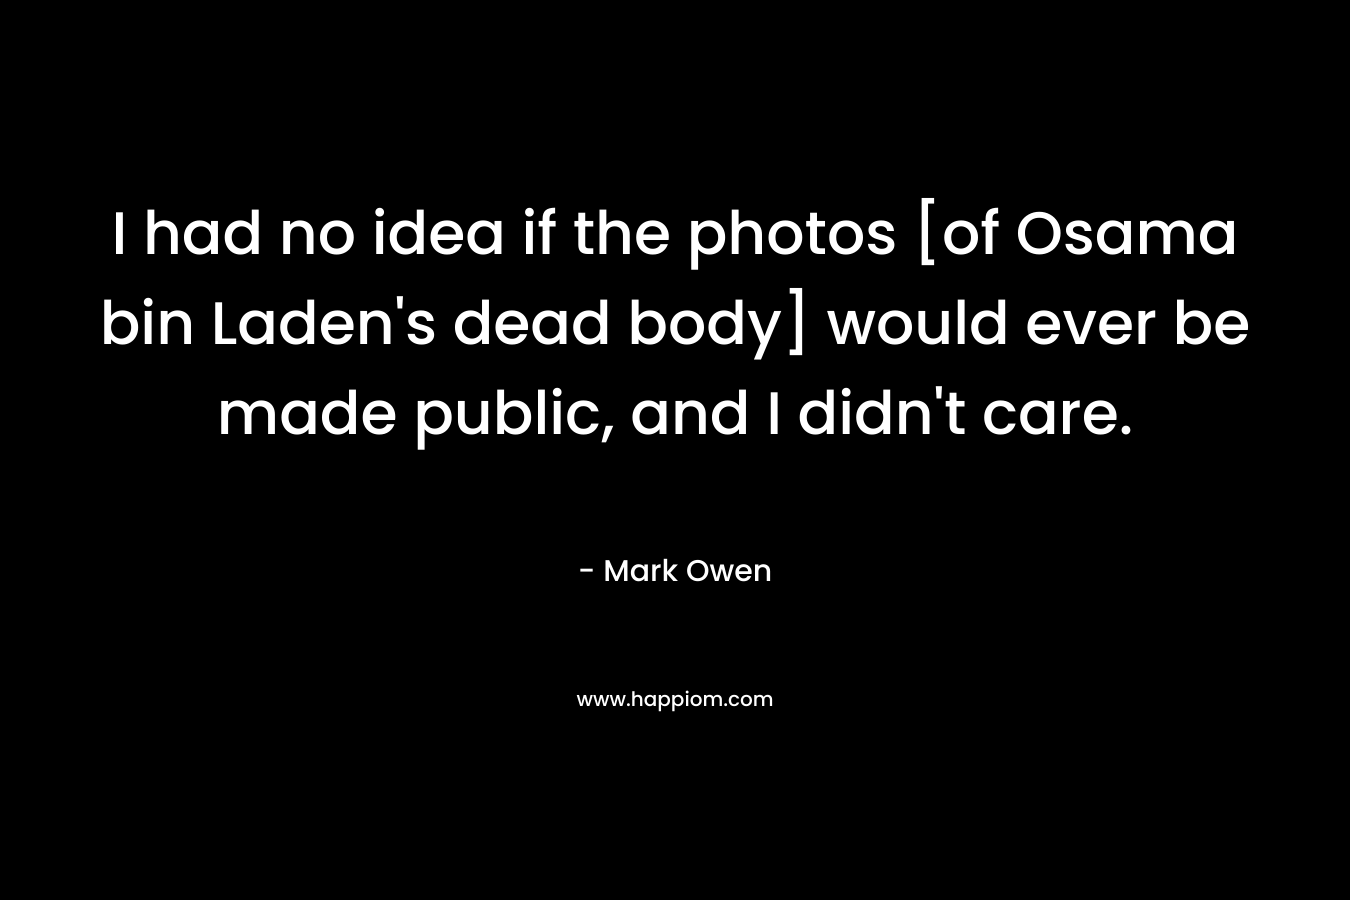 I had no idea if the photos [of Osama bin Laden’s dead body] would ever be made public, and I didn’t care. – Mark Owen